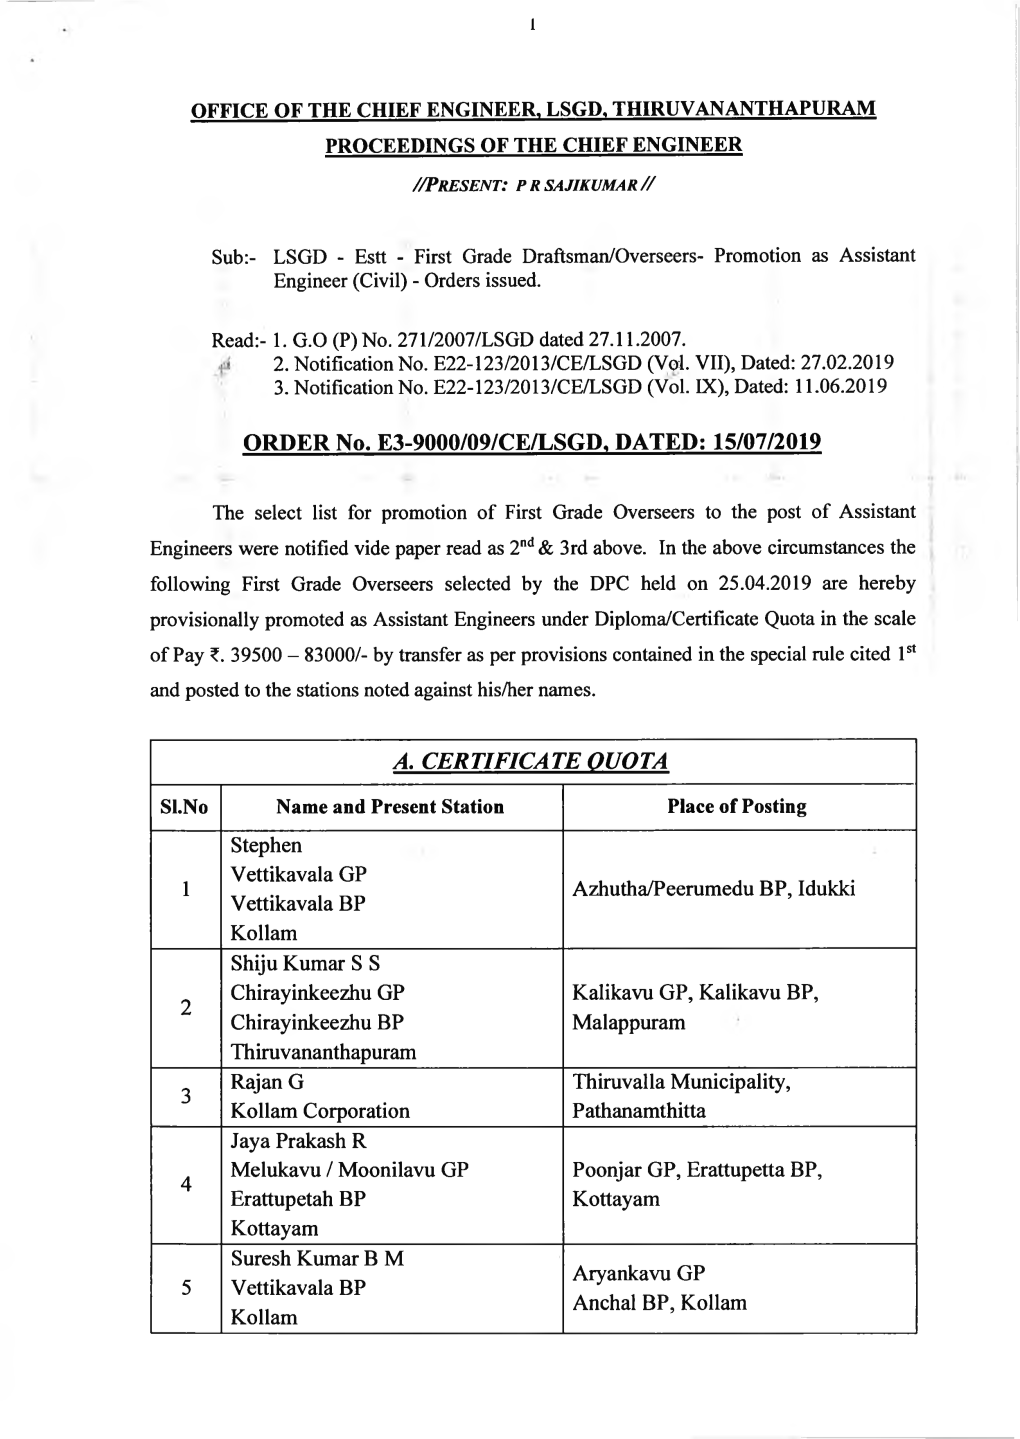 ORDER No. E3-9000/09/CE/LSGD, DATED: 15/07/2019